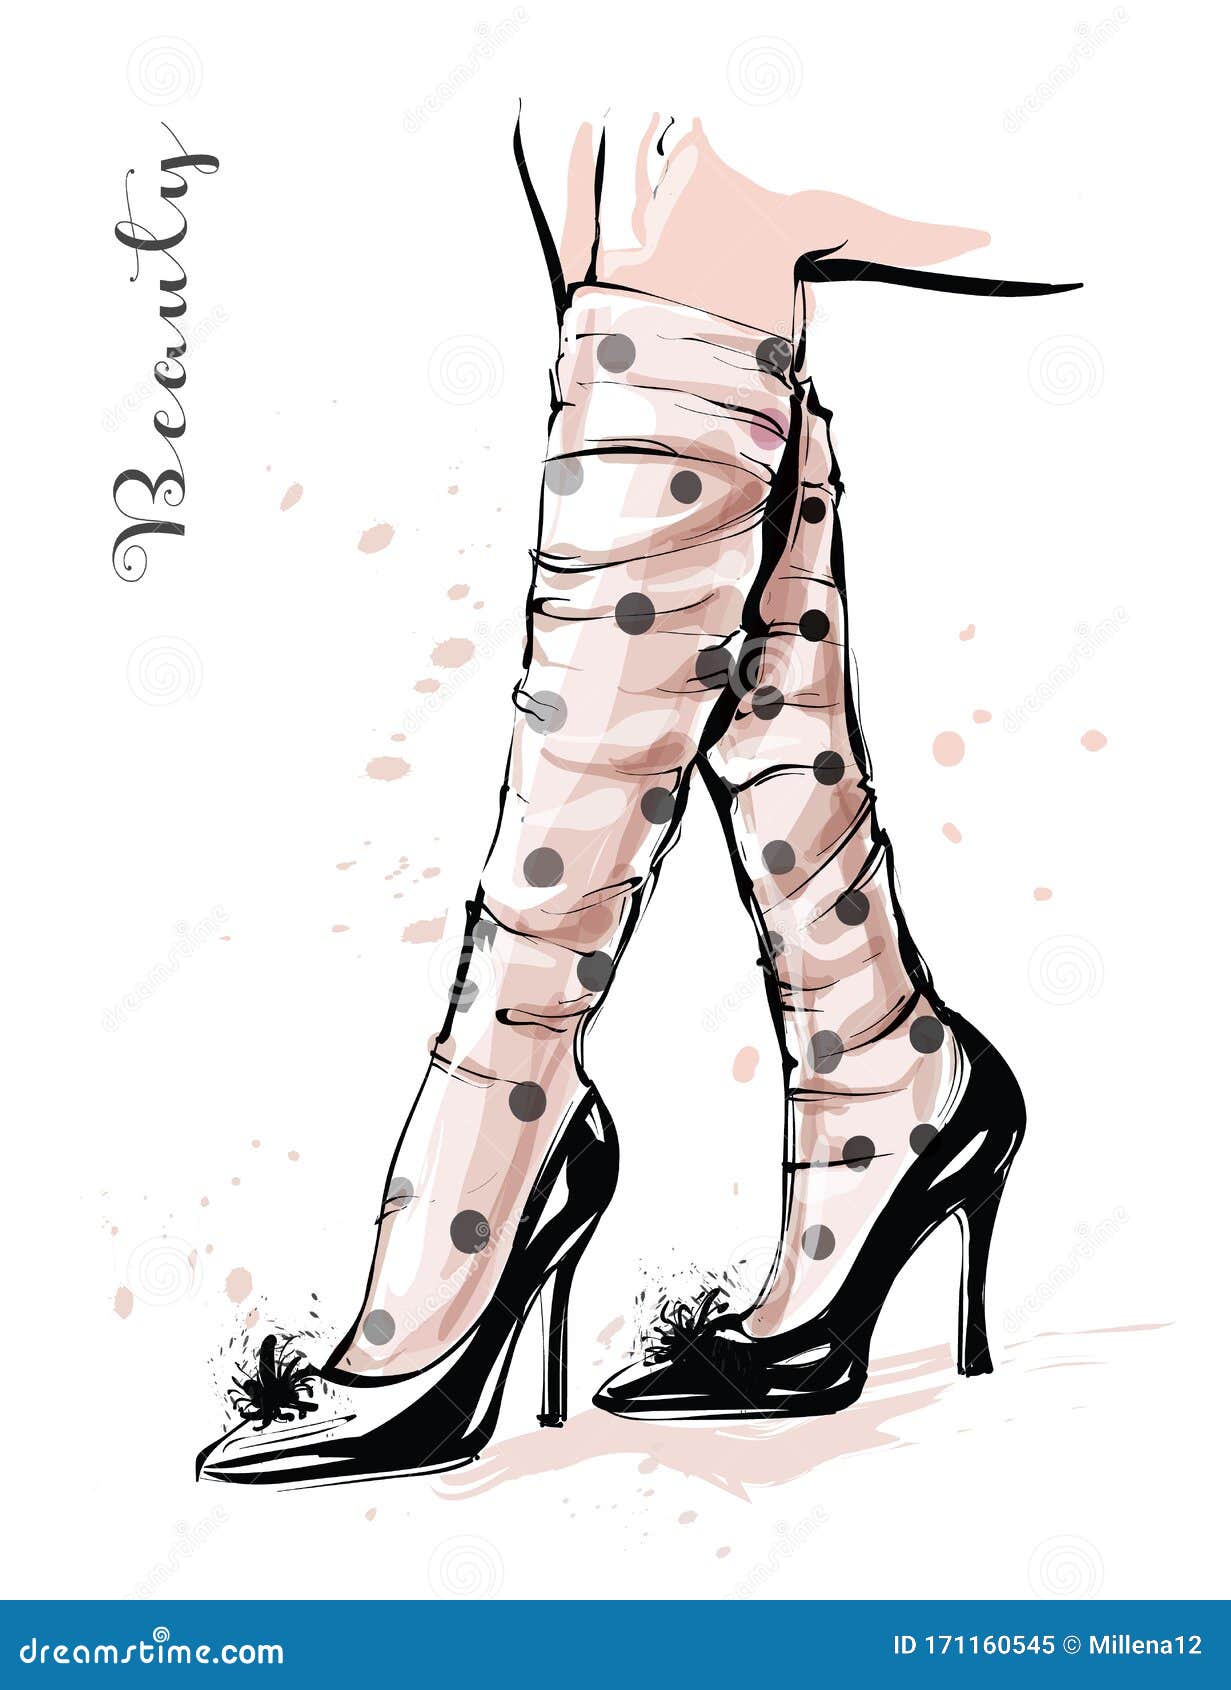 hand drawn stylish female legs shoes woman spotted sheer tulle socks fashion sketch vector illustration 171160545